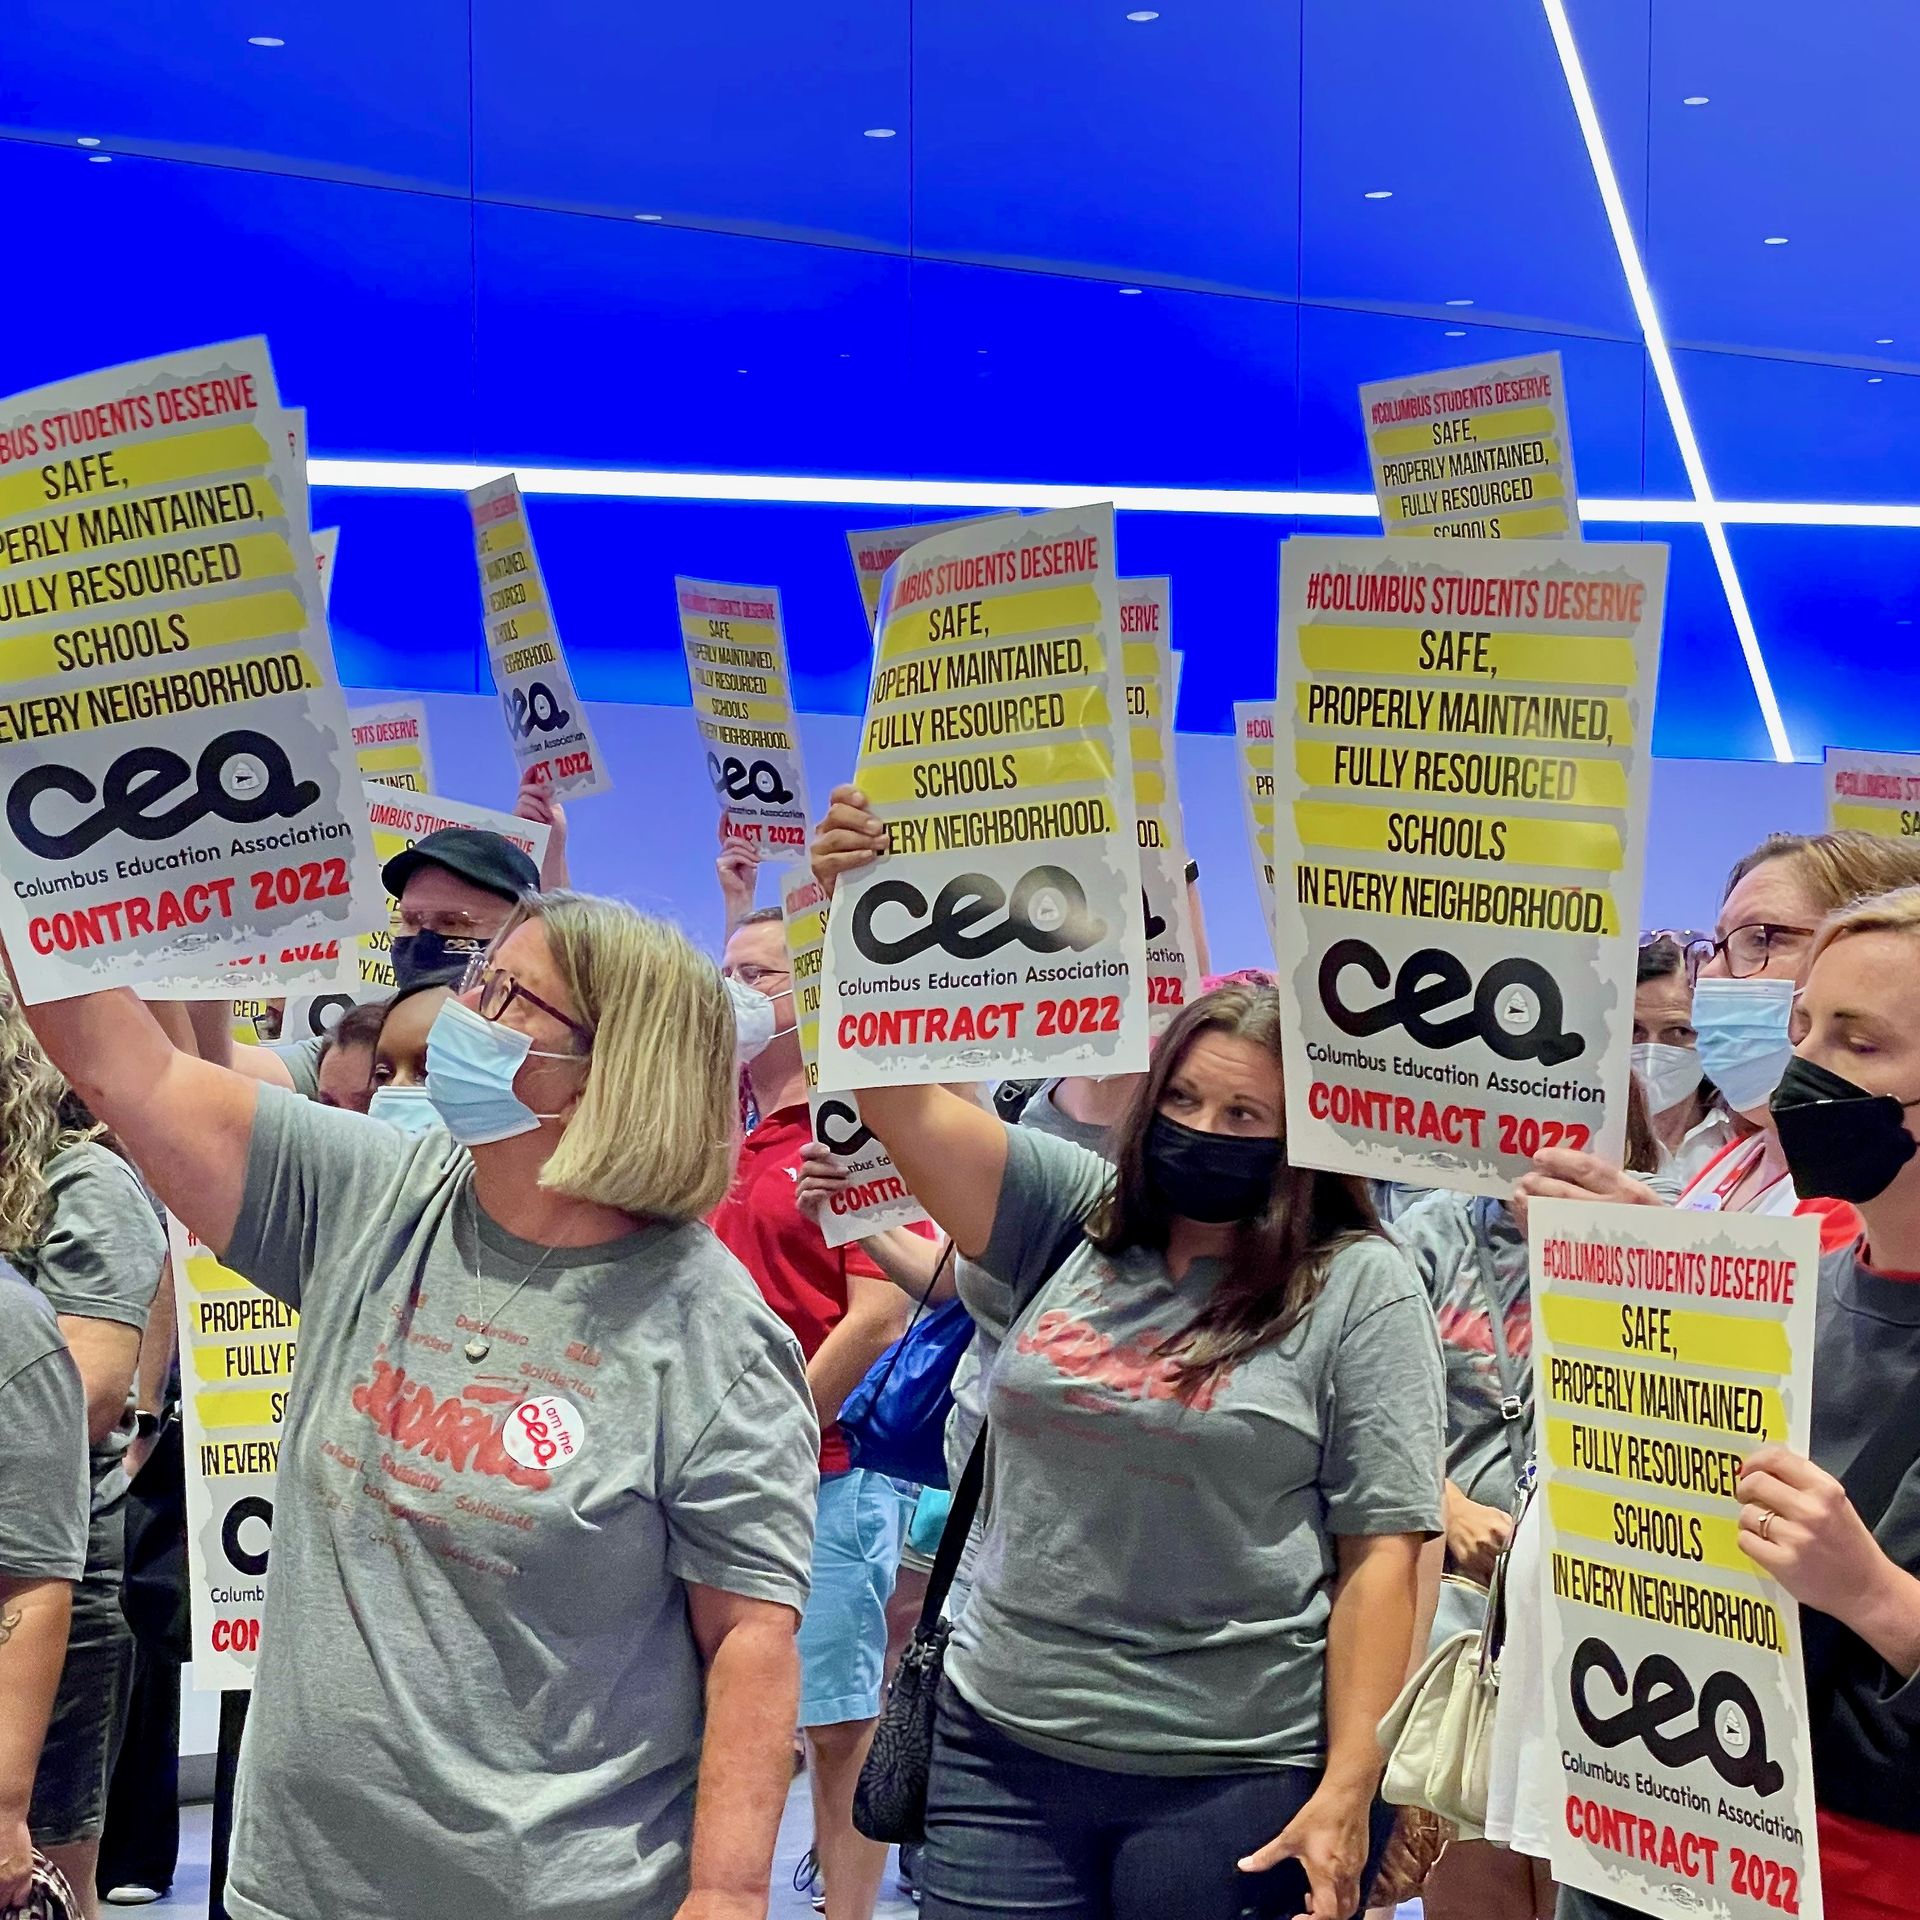 Teachers hold signs  that say "Columbus students deserve safe, properly maintained, fully resourced schools in every neighborhood. Columbus Education Association contract 2022"